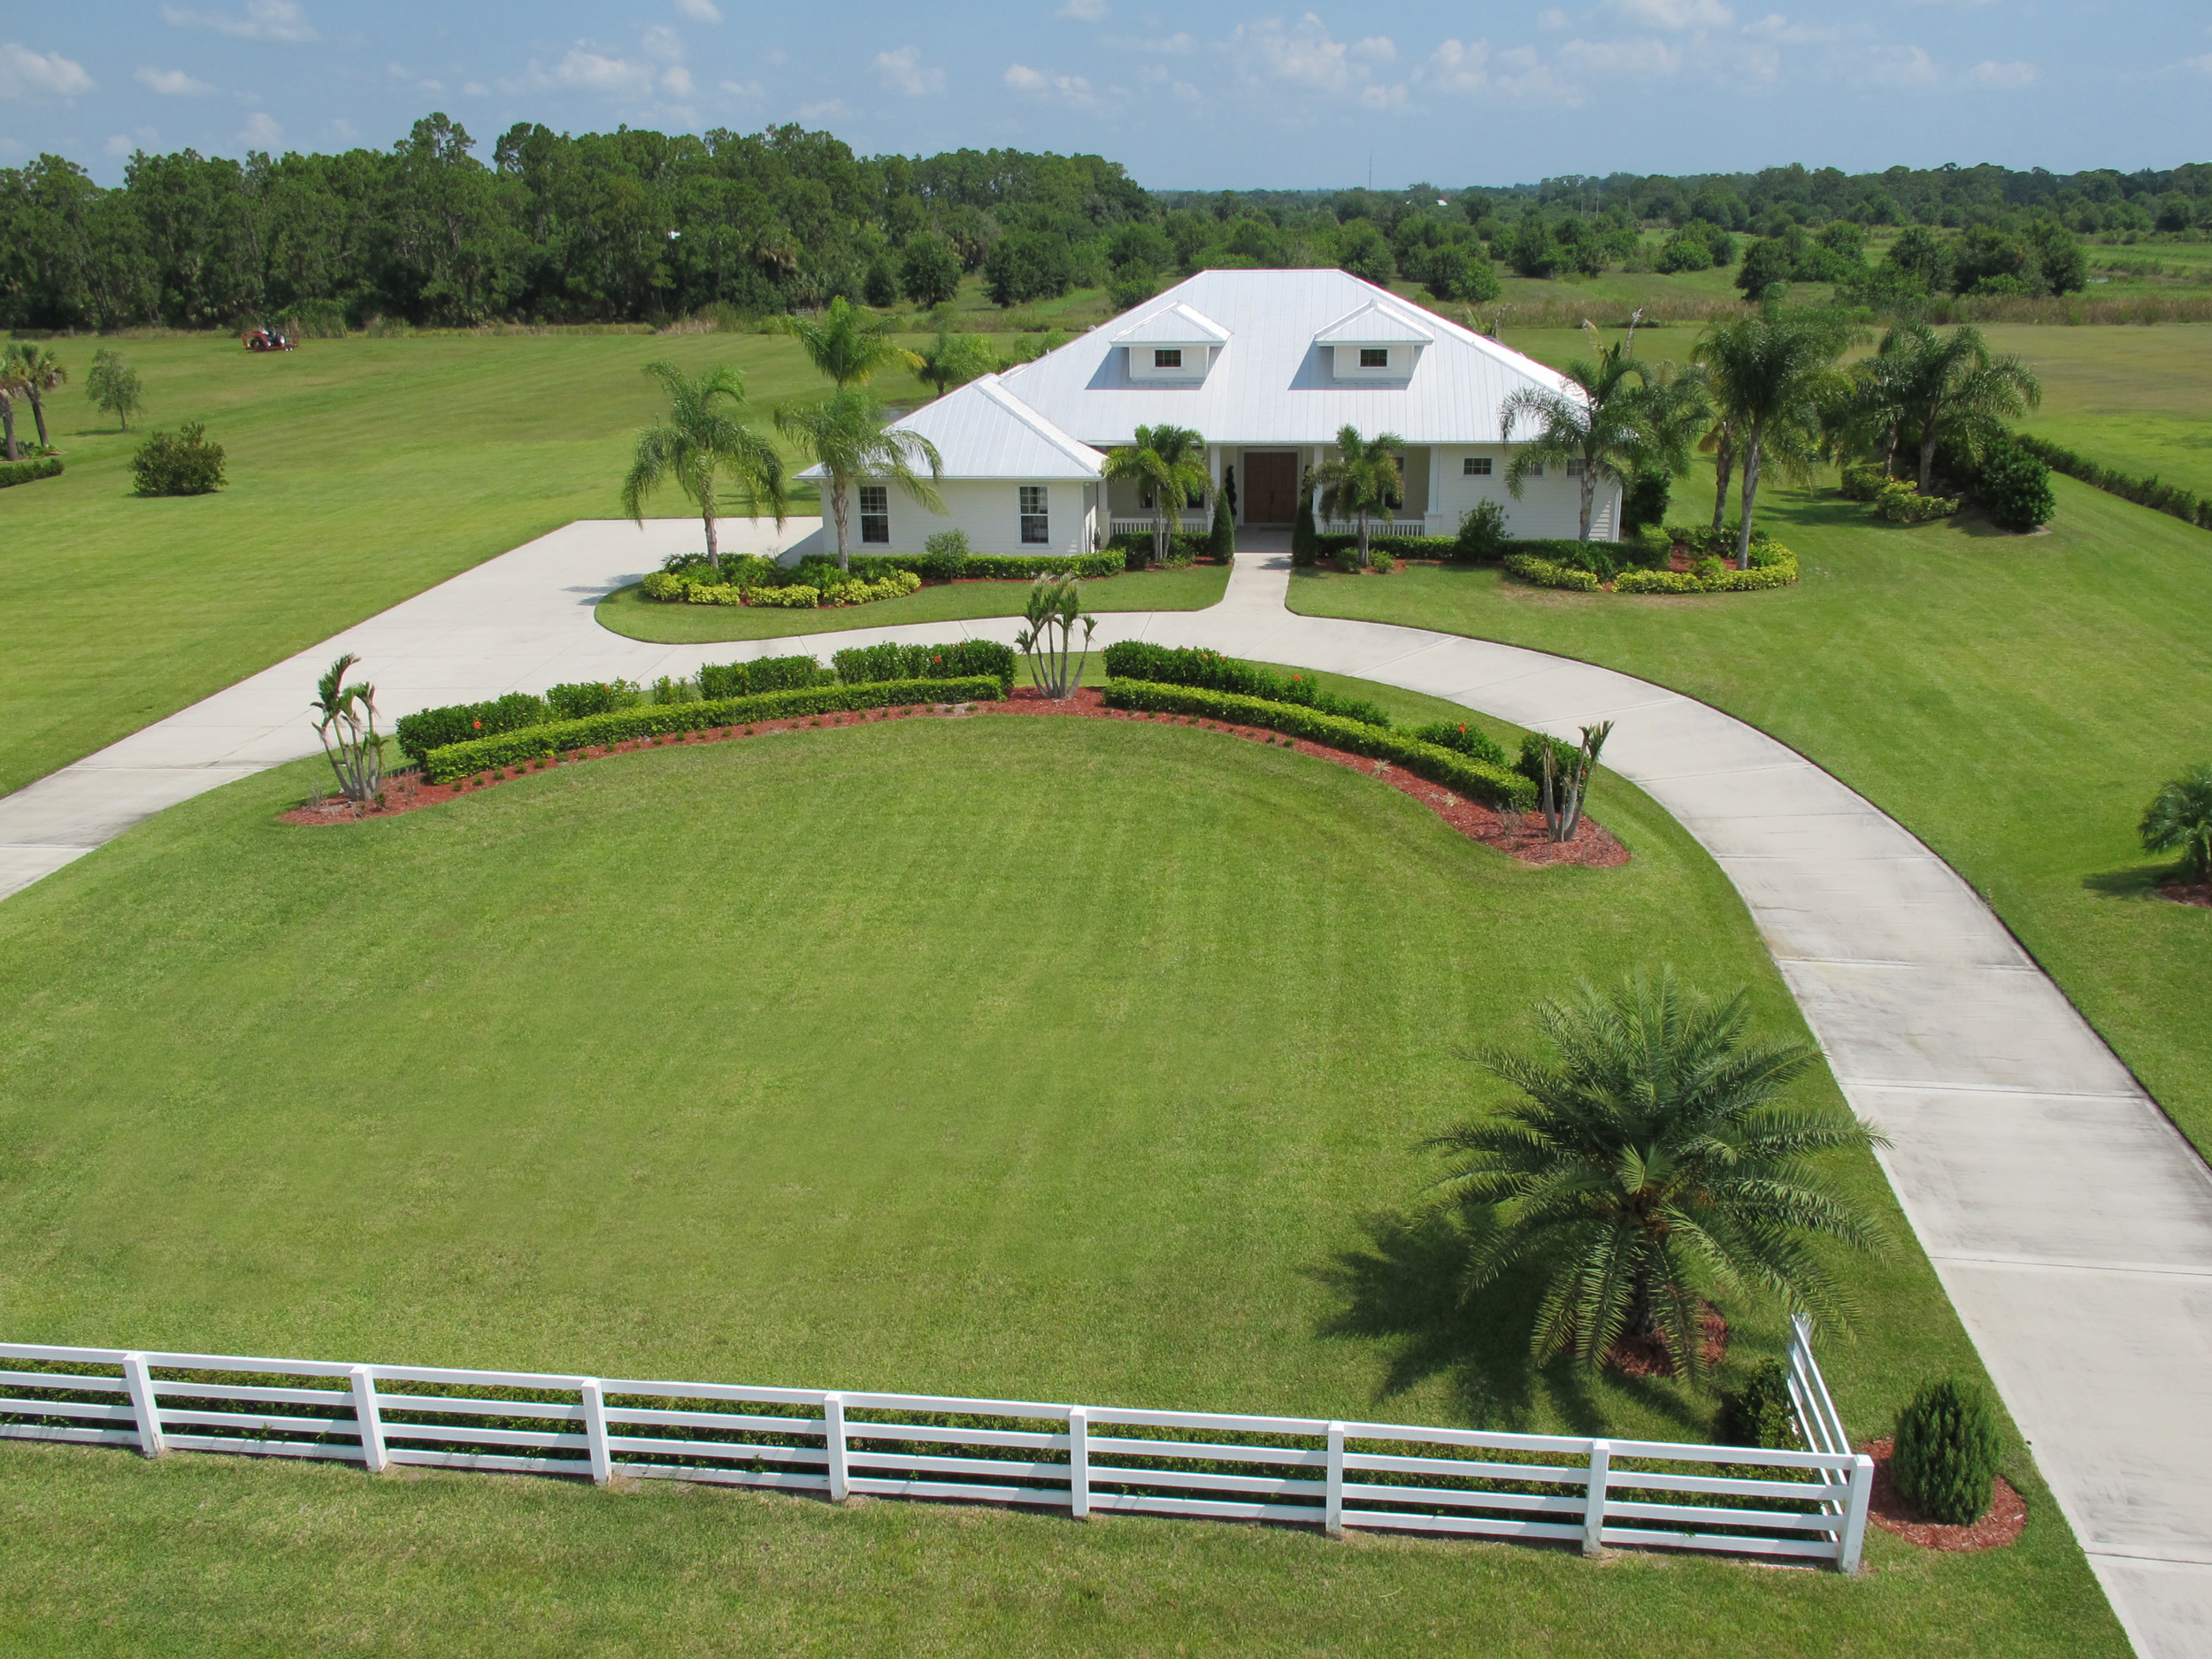 Aerial image of the front of a large ranch estate with a long circular driveway